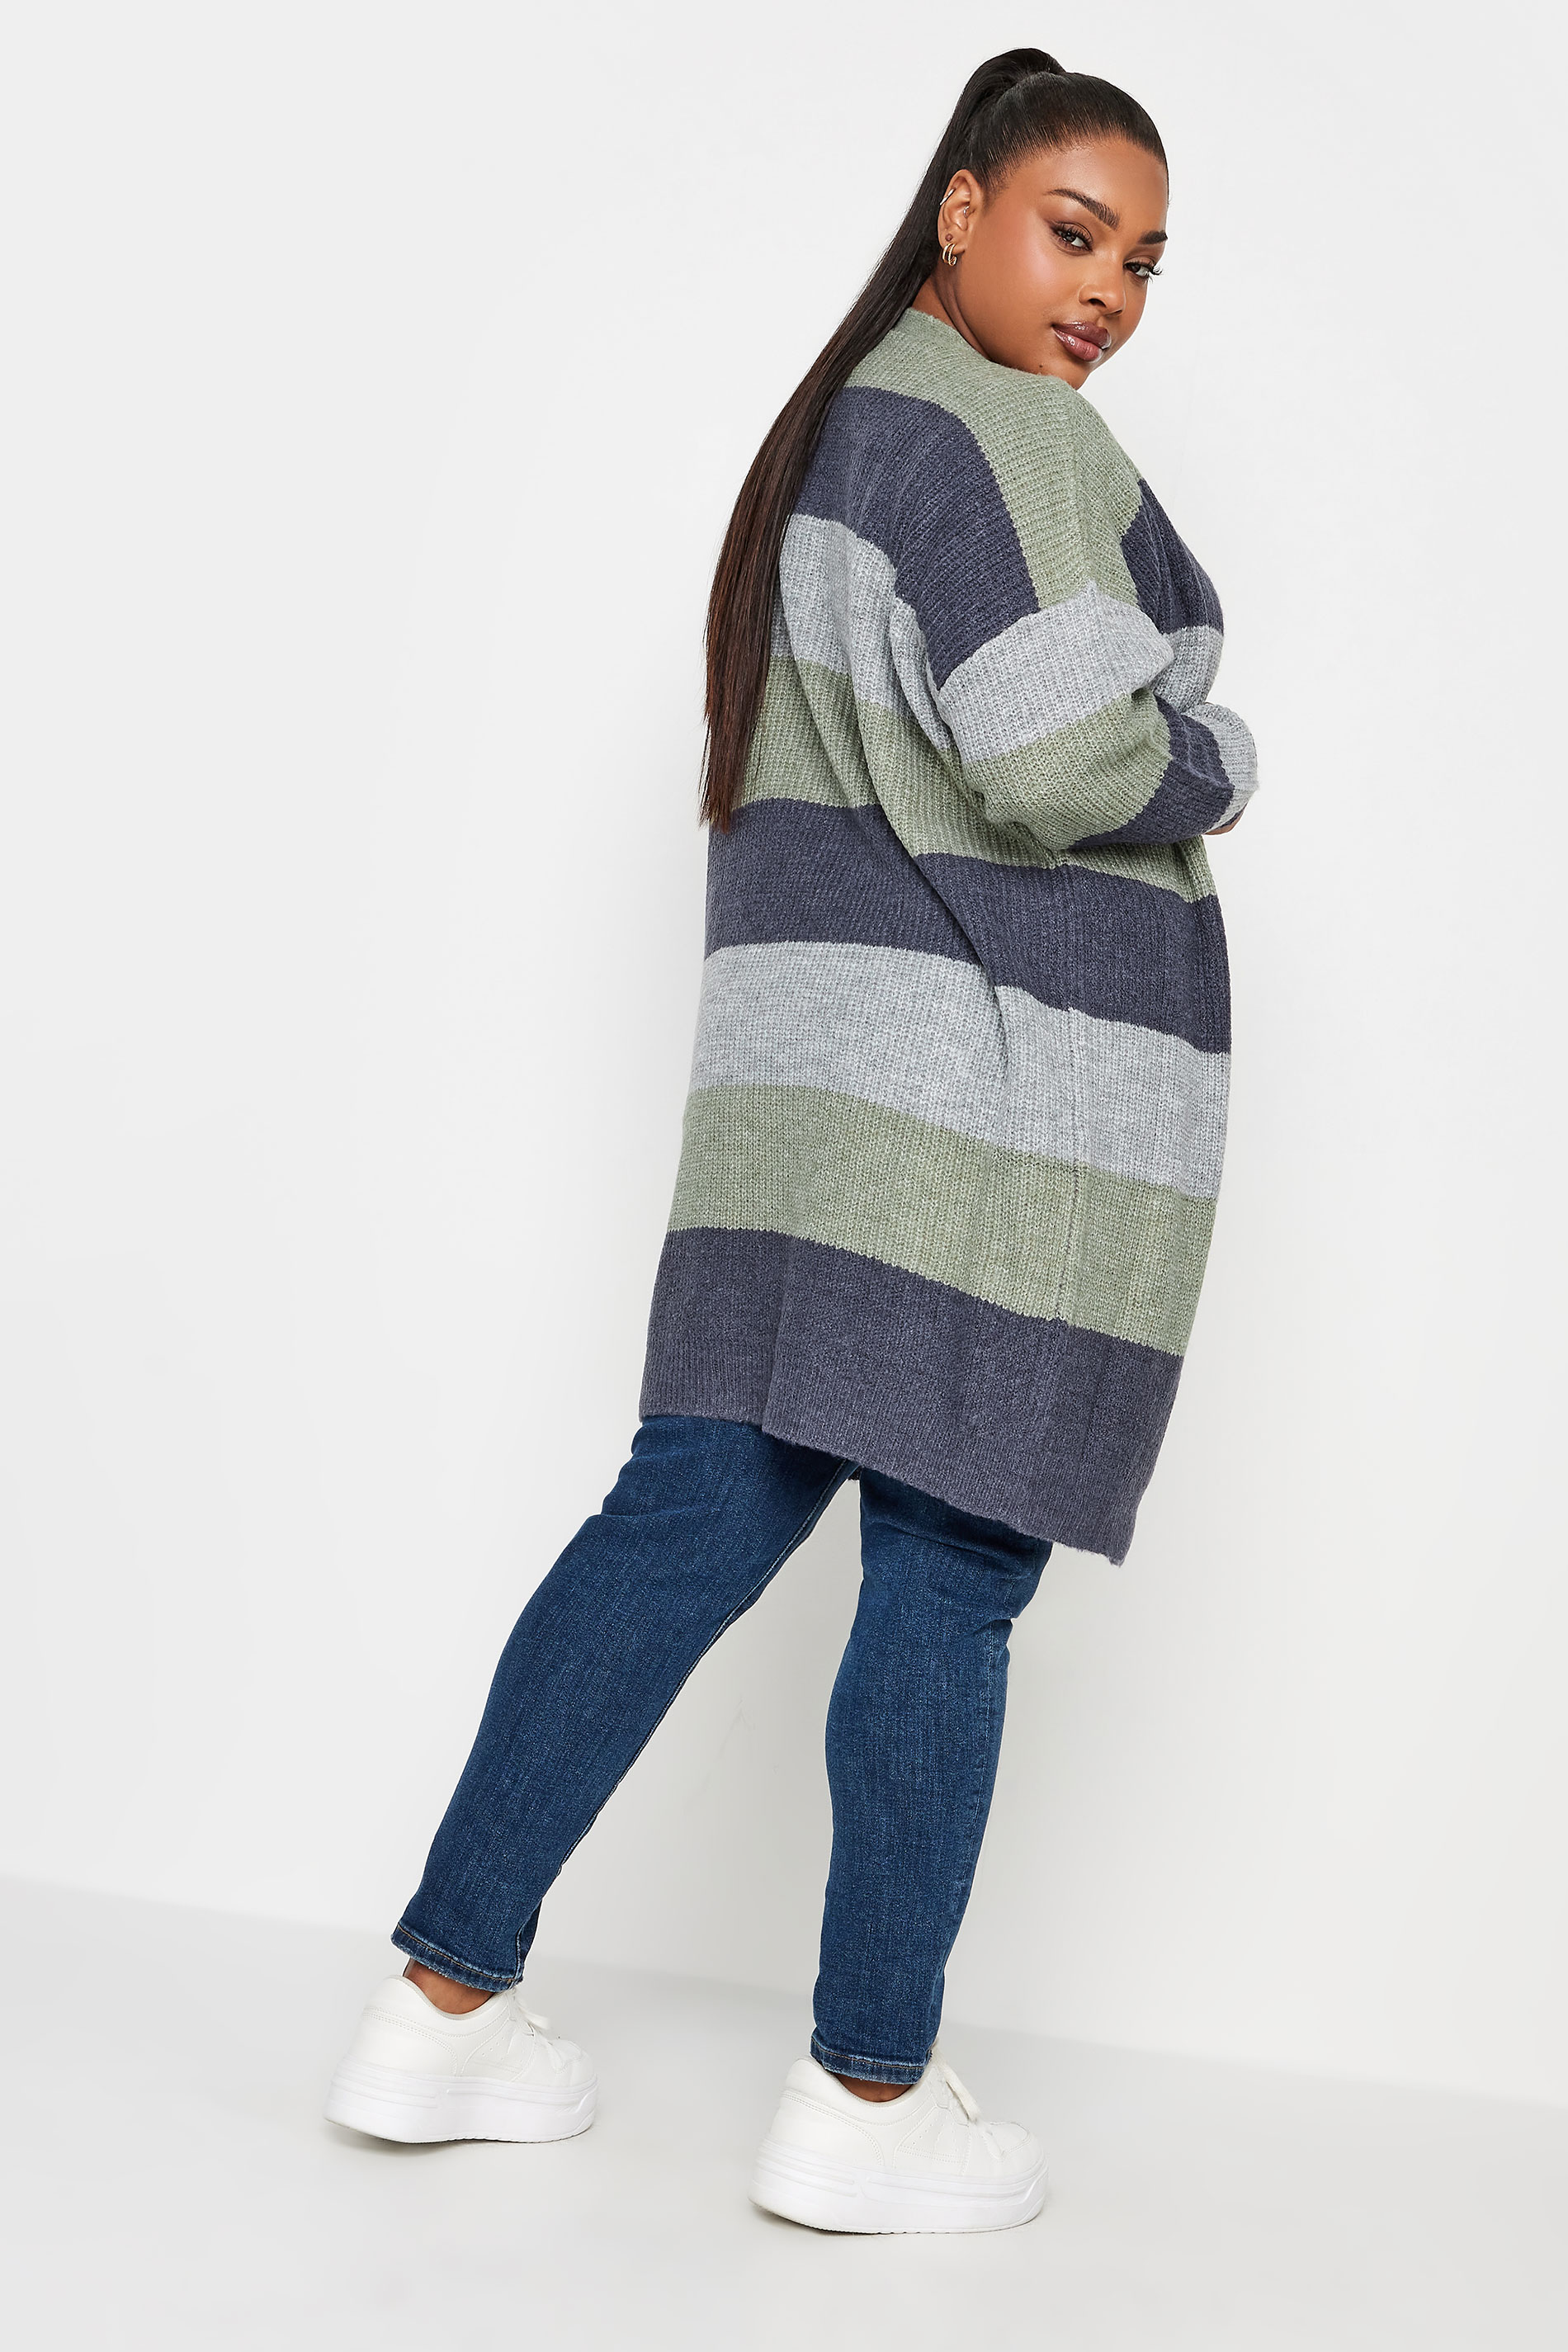 YOURS Plus Size Navy Blue Stripe Knitted Longline Cardigan | Yours Clothing 3